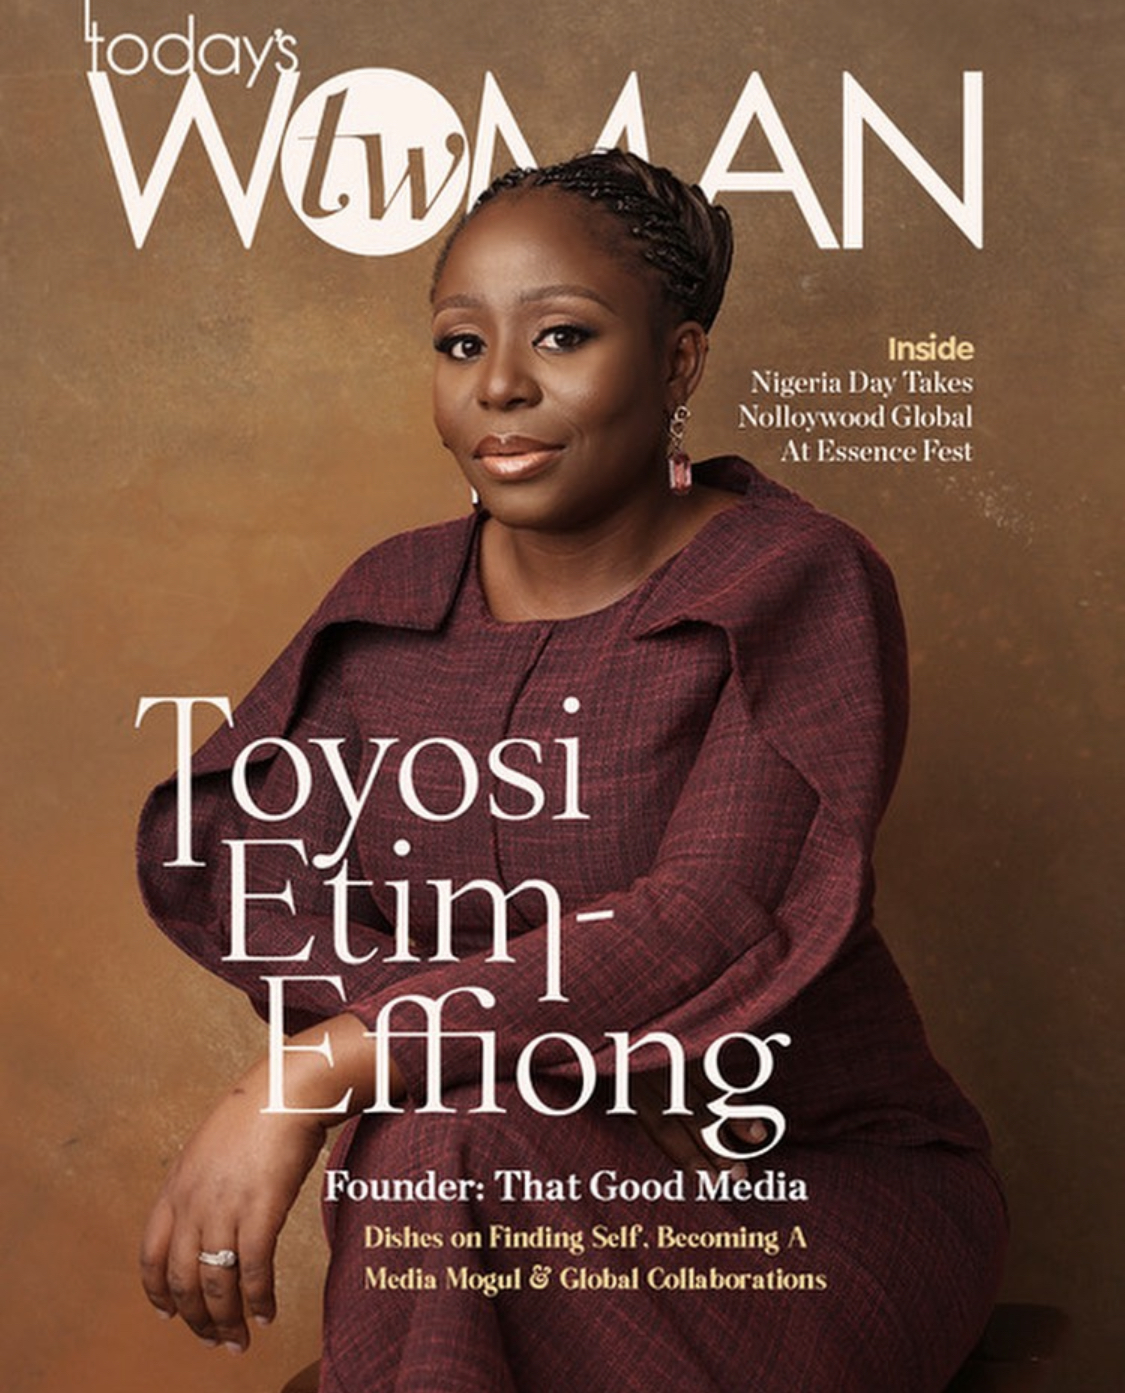 Toyosi Etim Effiong Features On TW Magazine Cover | Fab.ng